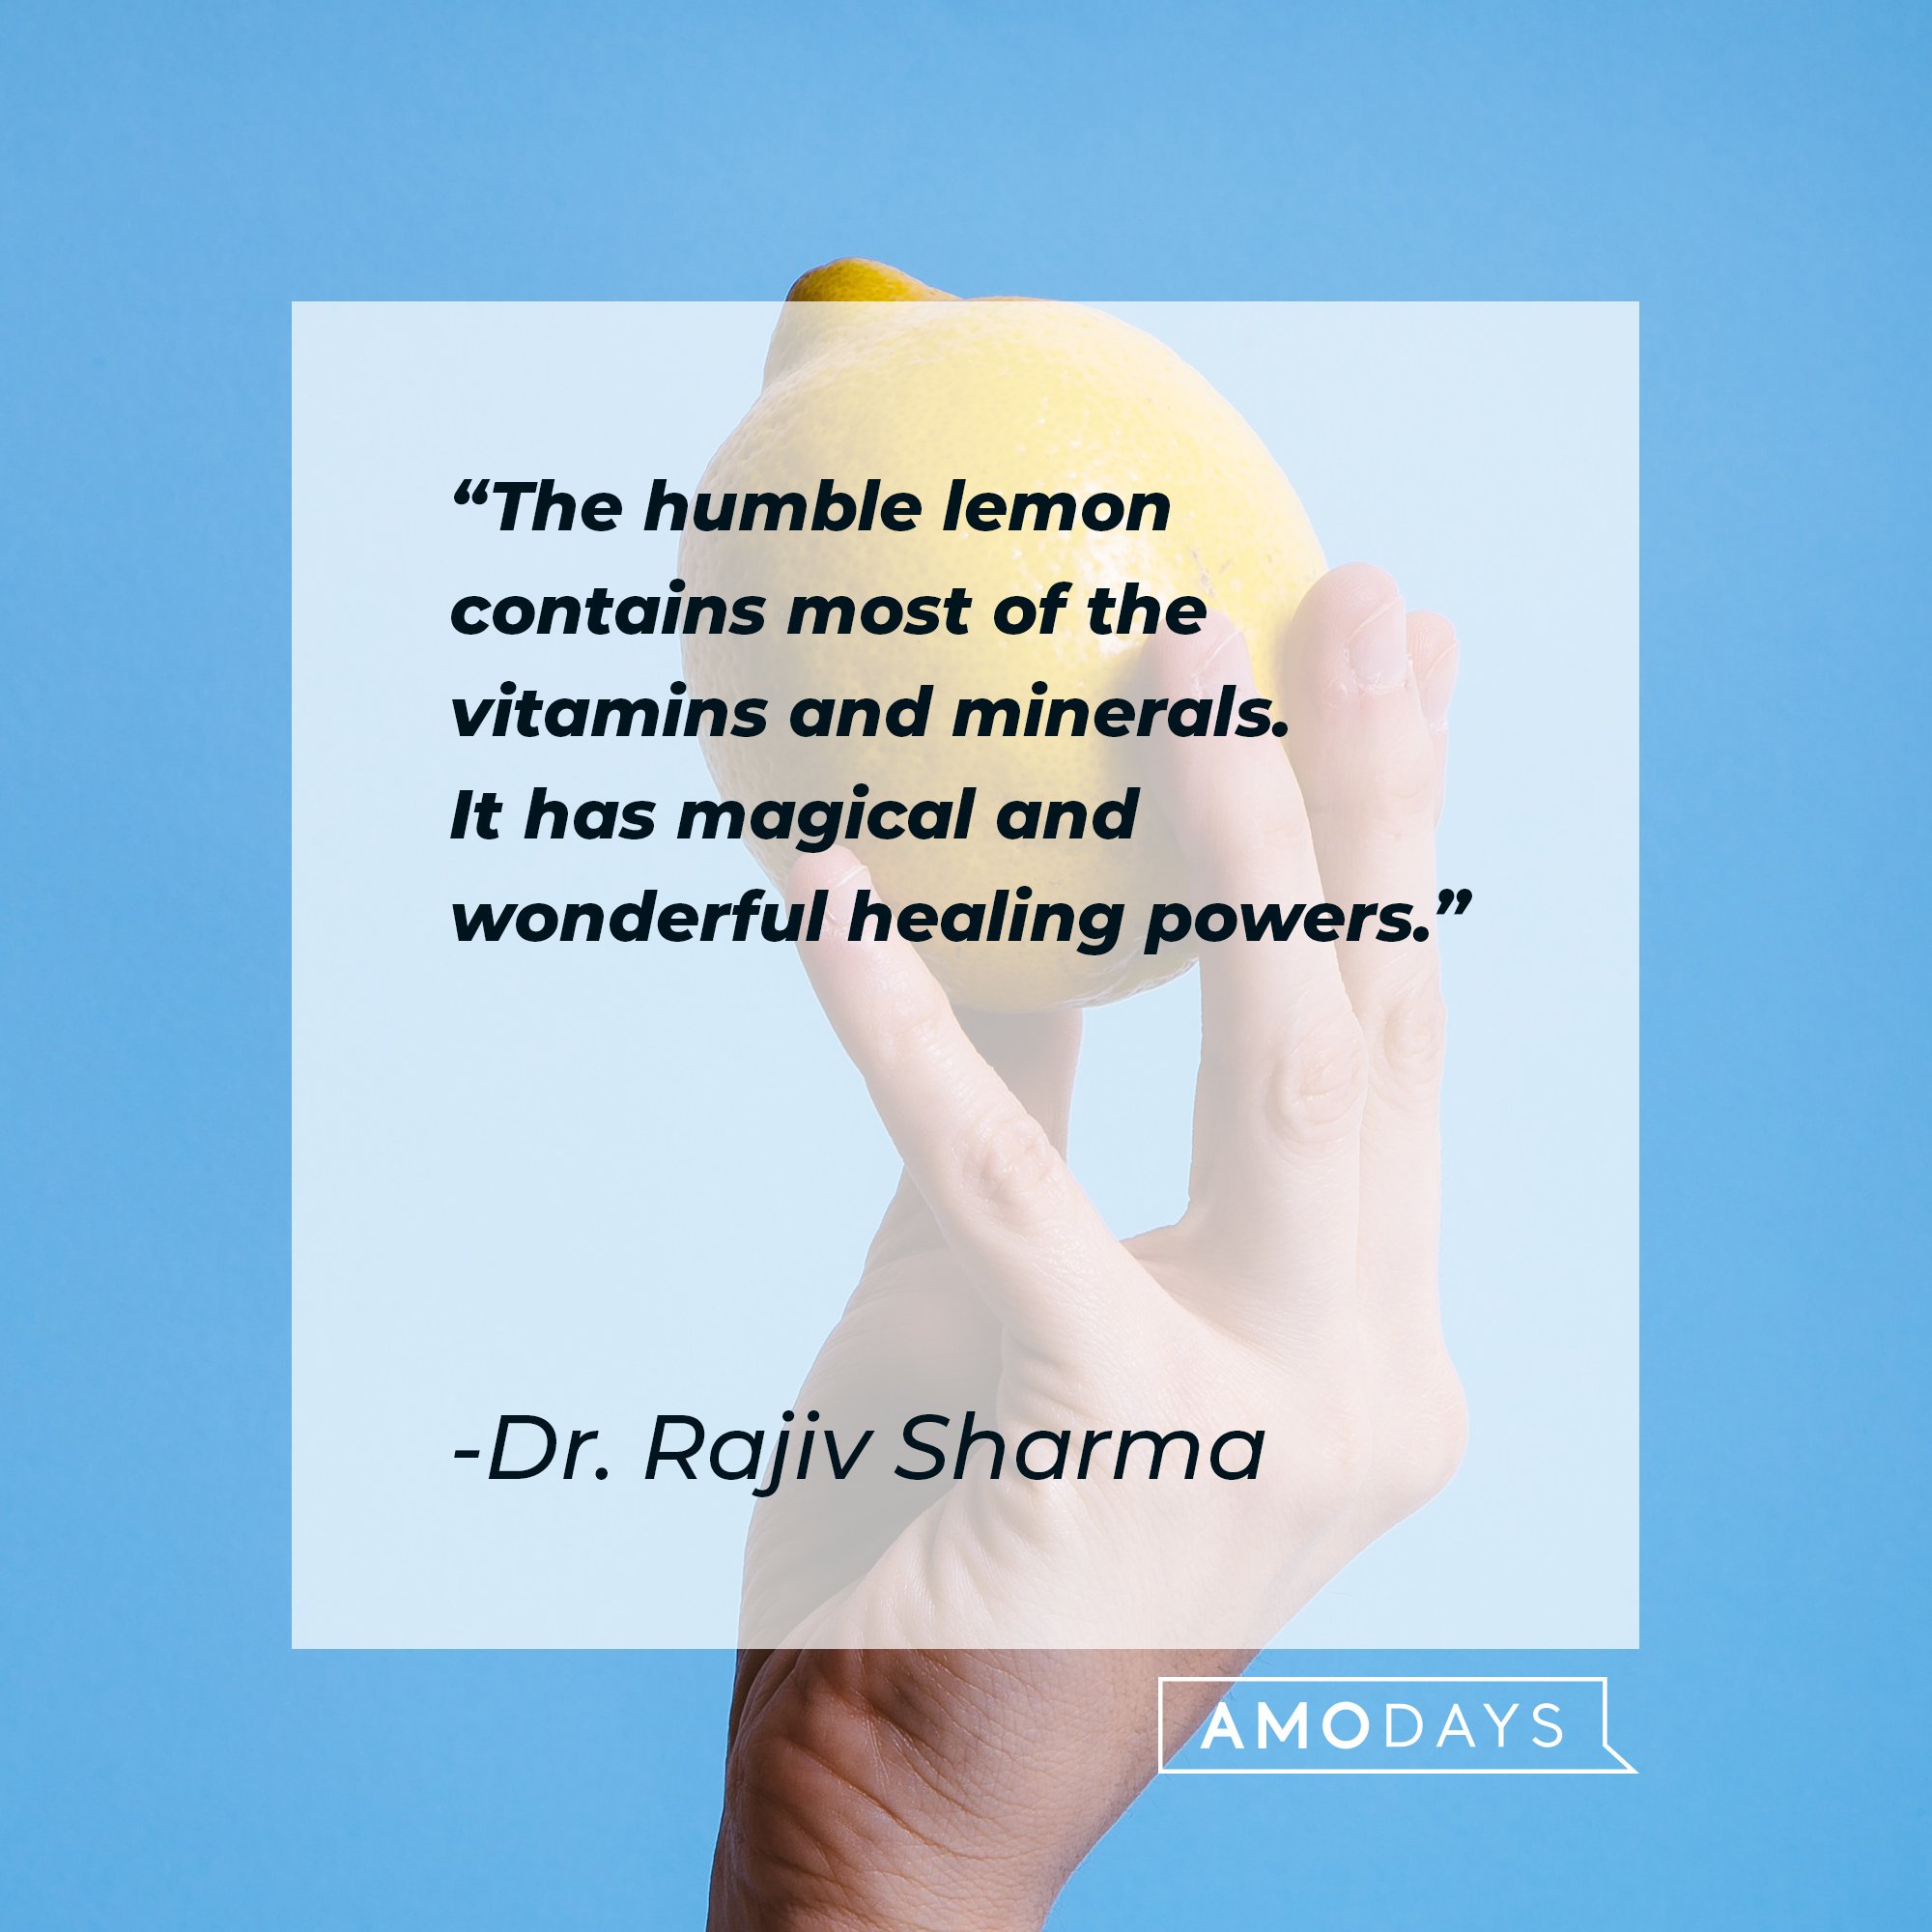 Dr. Rajiv Sharma’s quote: "The humble lemon contains most of the vitamins and minerals. It has magical and wonderful healing powers." | Image: AmoDays   